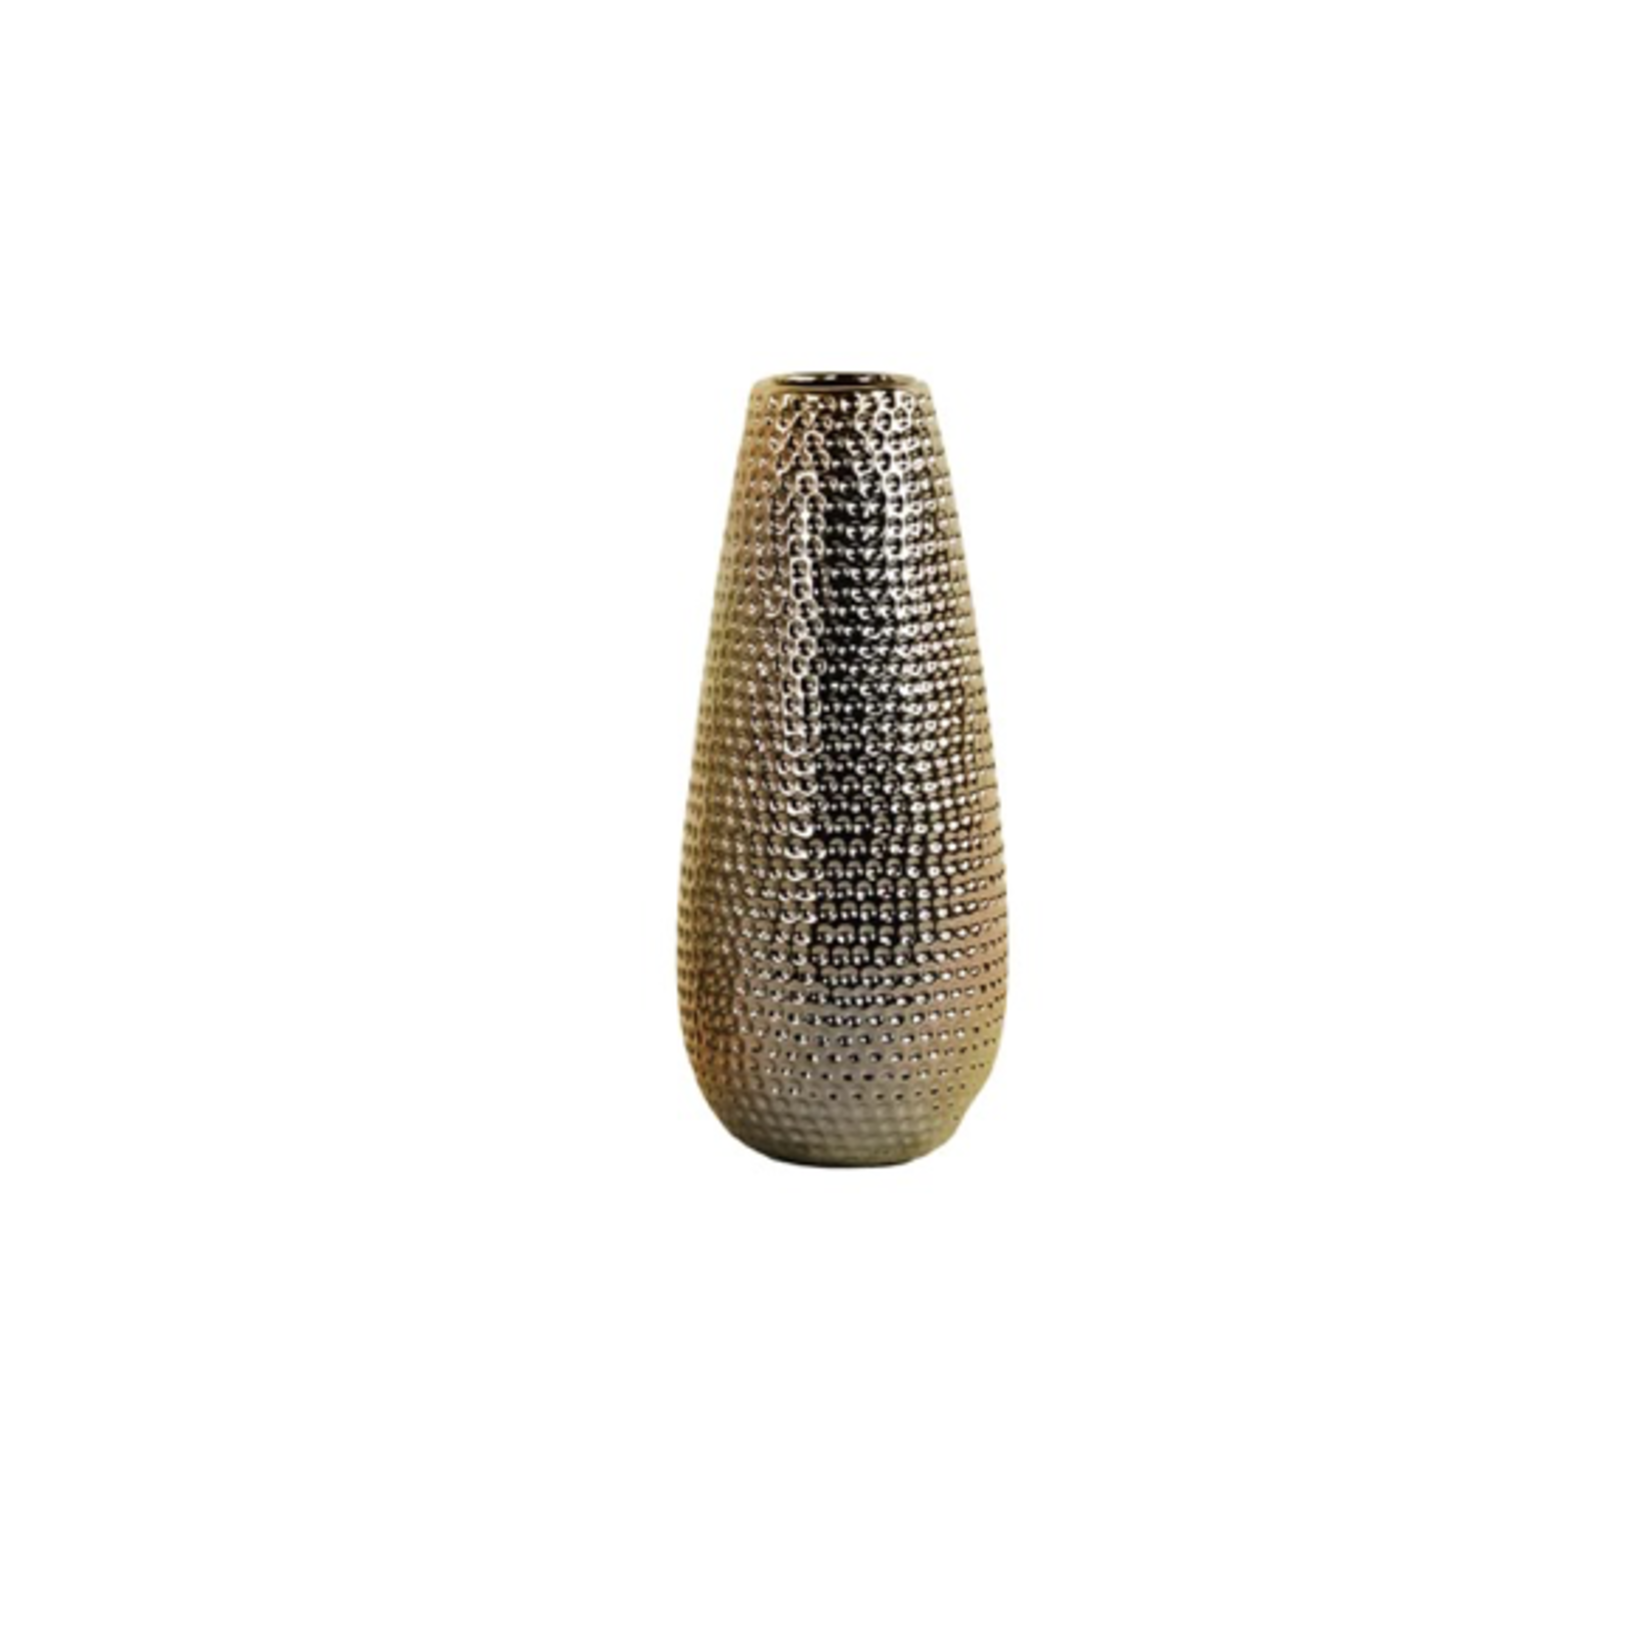 40% off was $19 now $11.39 10”H X 4.5” POLISHED GOLD CERAMIC DIMPLE TAPERED CYLINDER